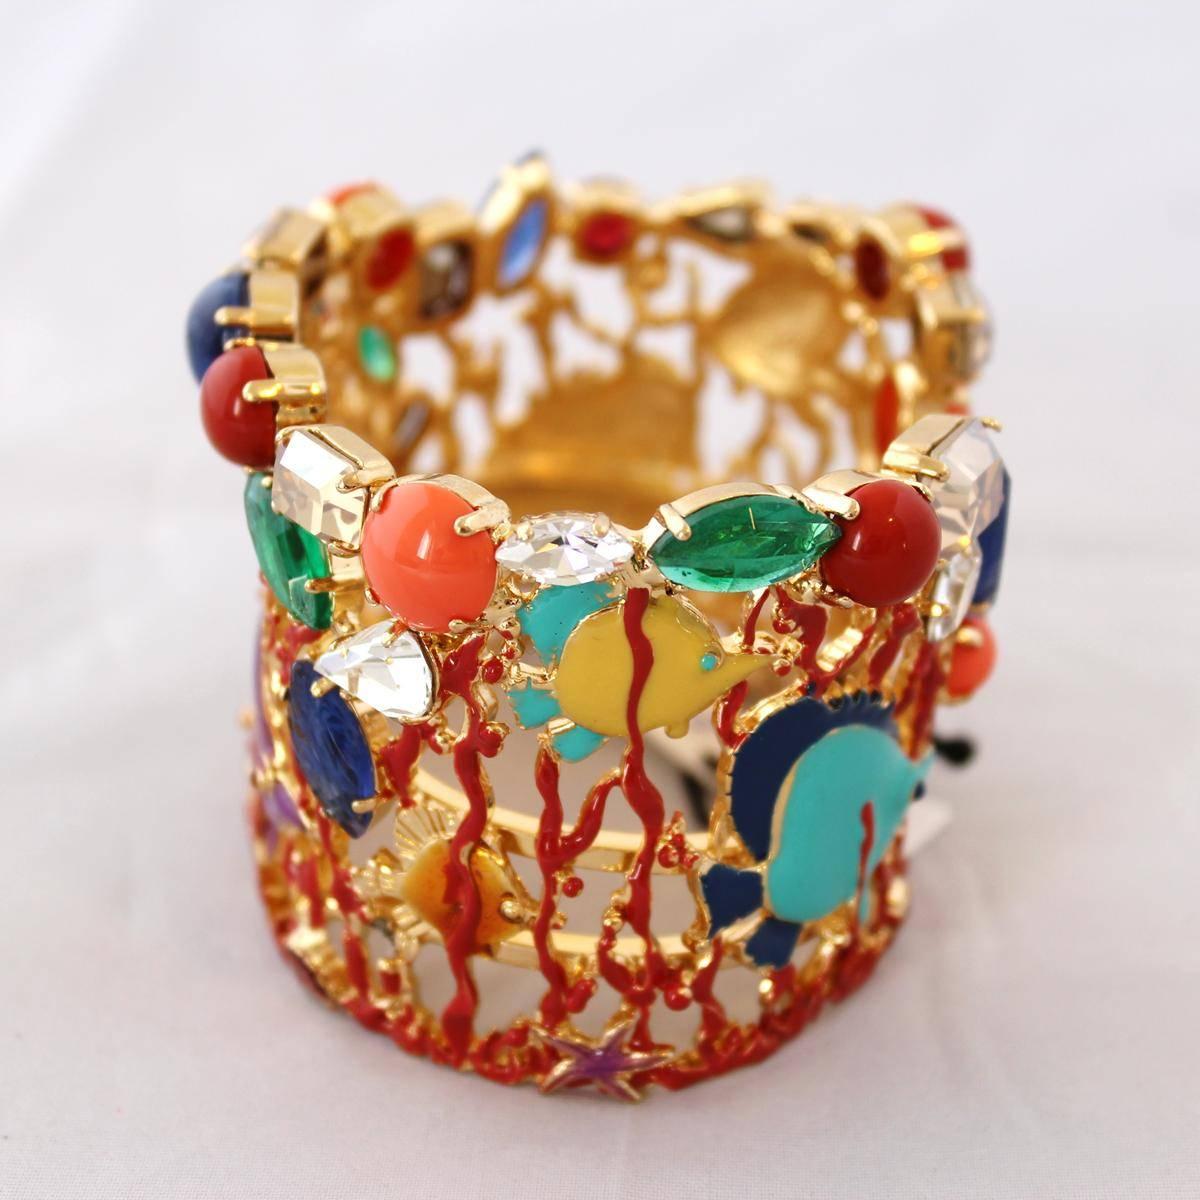 Stunning piece by Carlo Zini Milano
One of the greatest world fashion jewelry designers
Marine pattern
Fantastic work of hand painted elements, golden metal, swarovski crystals and stones
Non allergenic 
18 KT gold dipped (3 micron)
Wrist cm 17